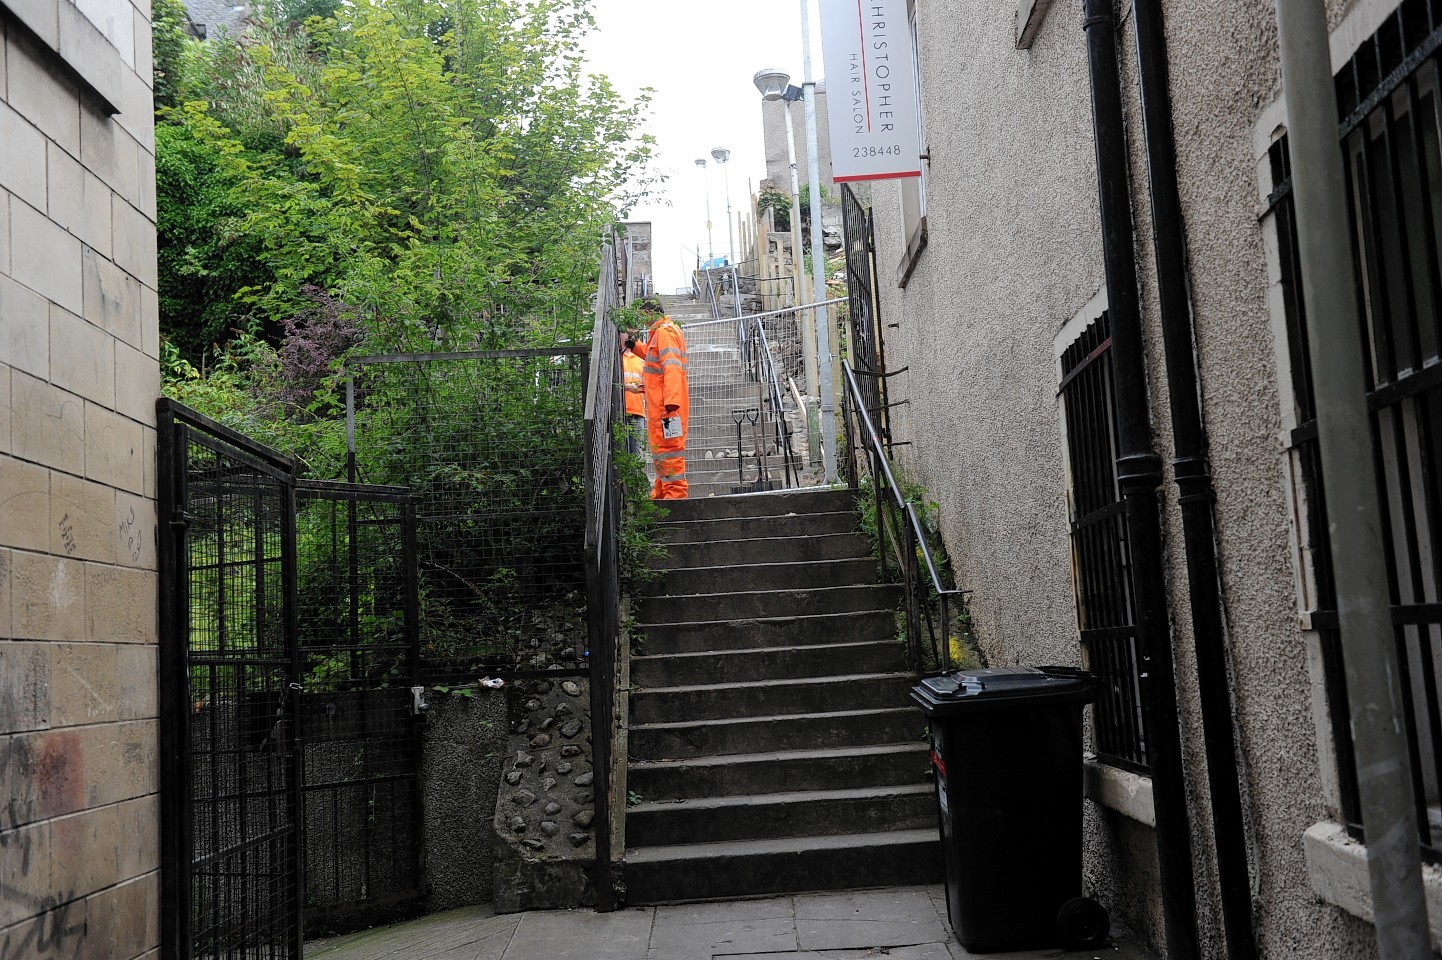 Raining’s Stairs will benefit from a complete makeover with the steps, walls, railings and lighting all due to be refurbished